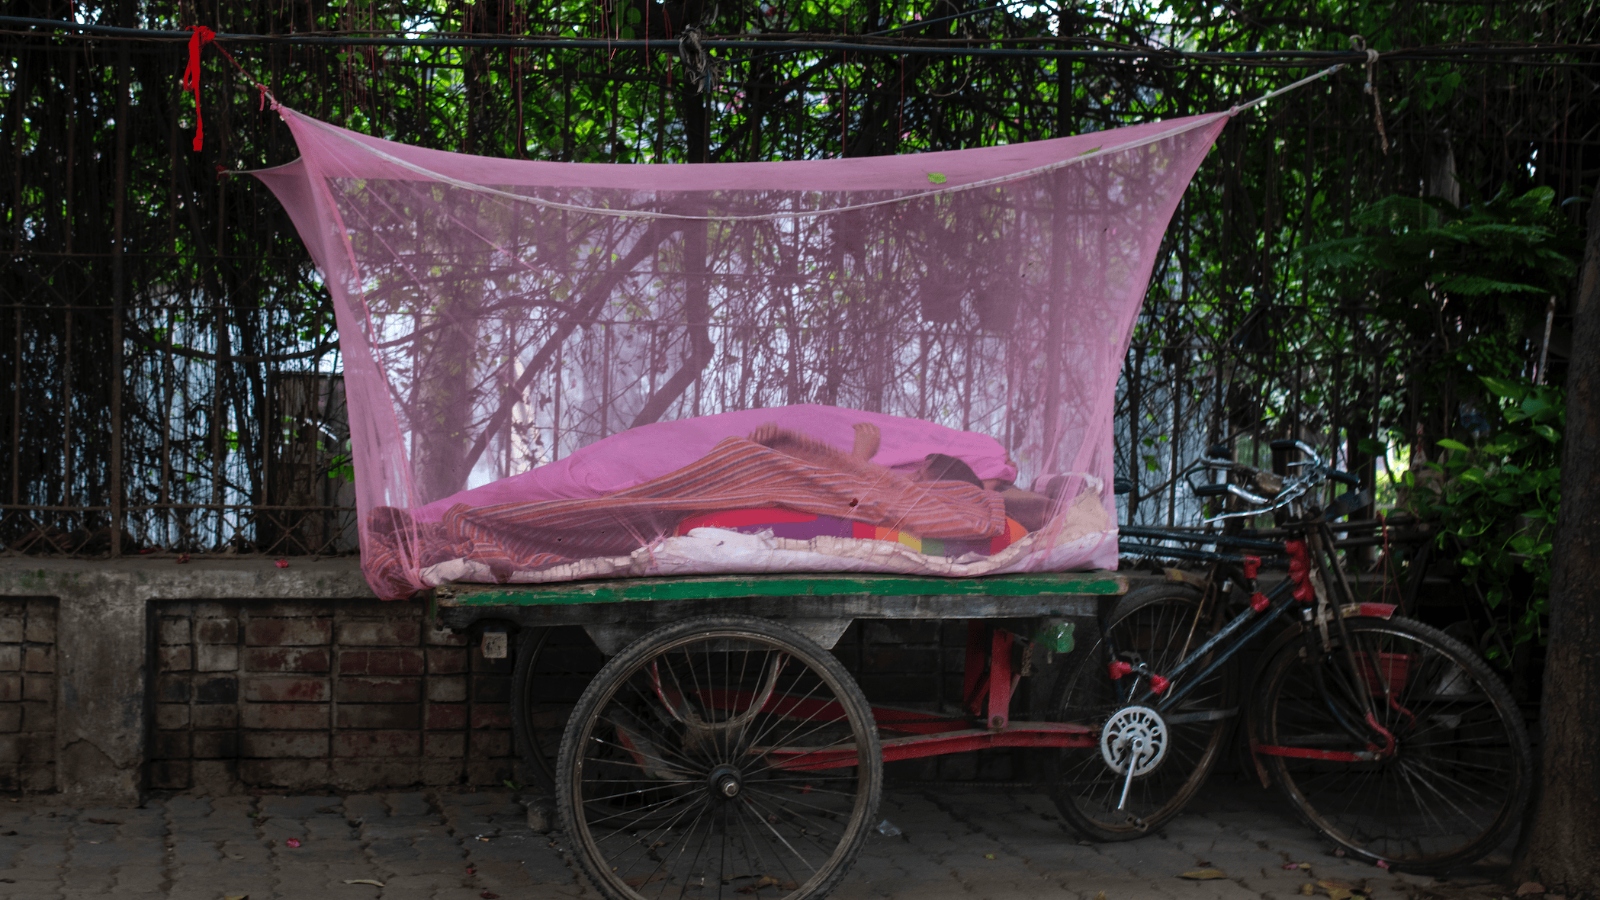 A pink mosquito net is stretched around figures lying on a platform on the back of a bicycle, in front of a thicket of plants